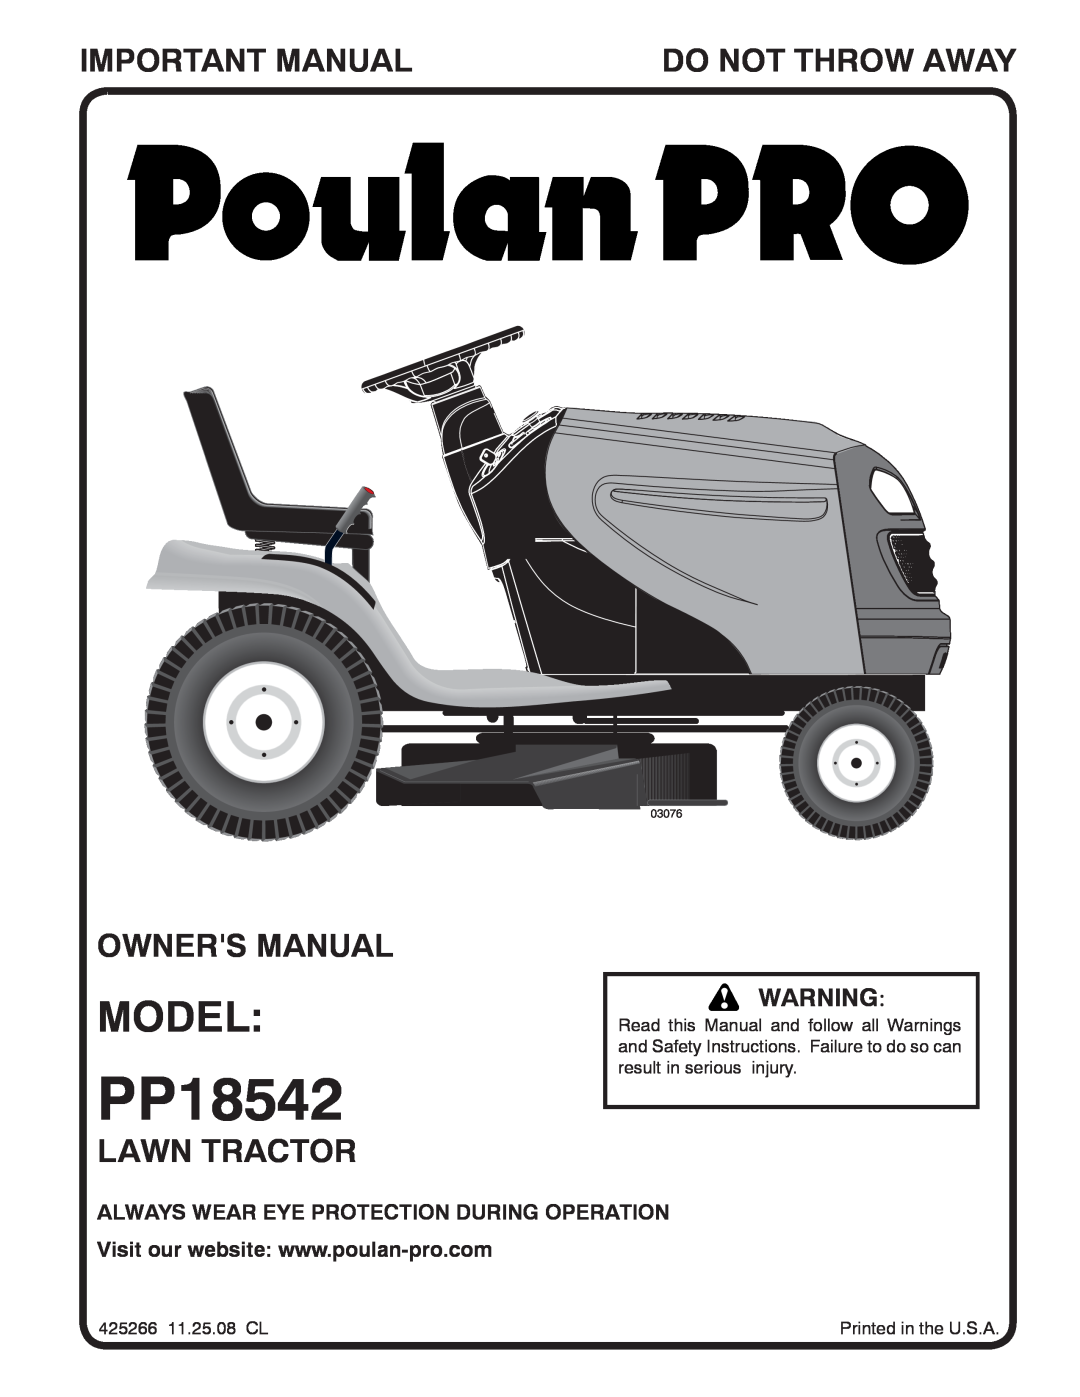 Poulan PP18542 owner manual Model, Important Manual, Do Not Throw Away, Lawn Tractor, 03076 